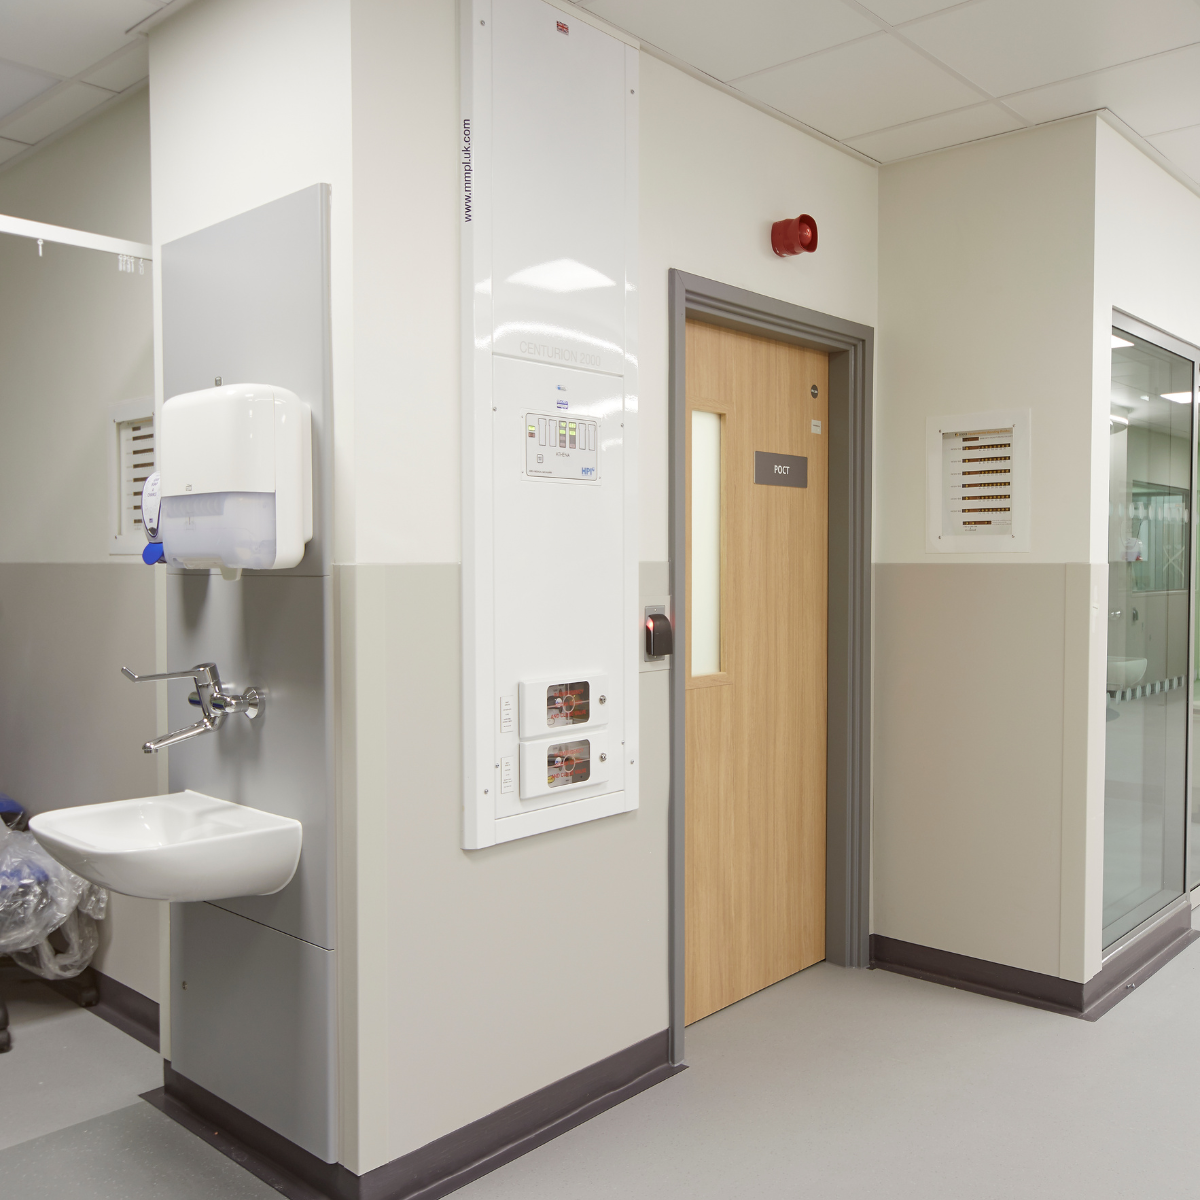 The Critical Role of Infection Control in Healthcare Doorset Specification